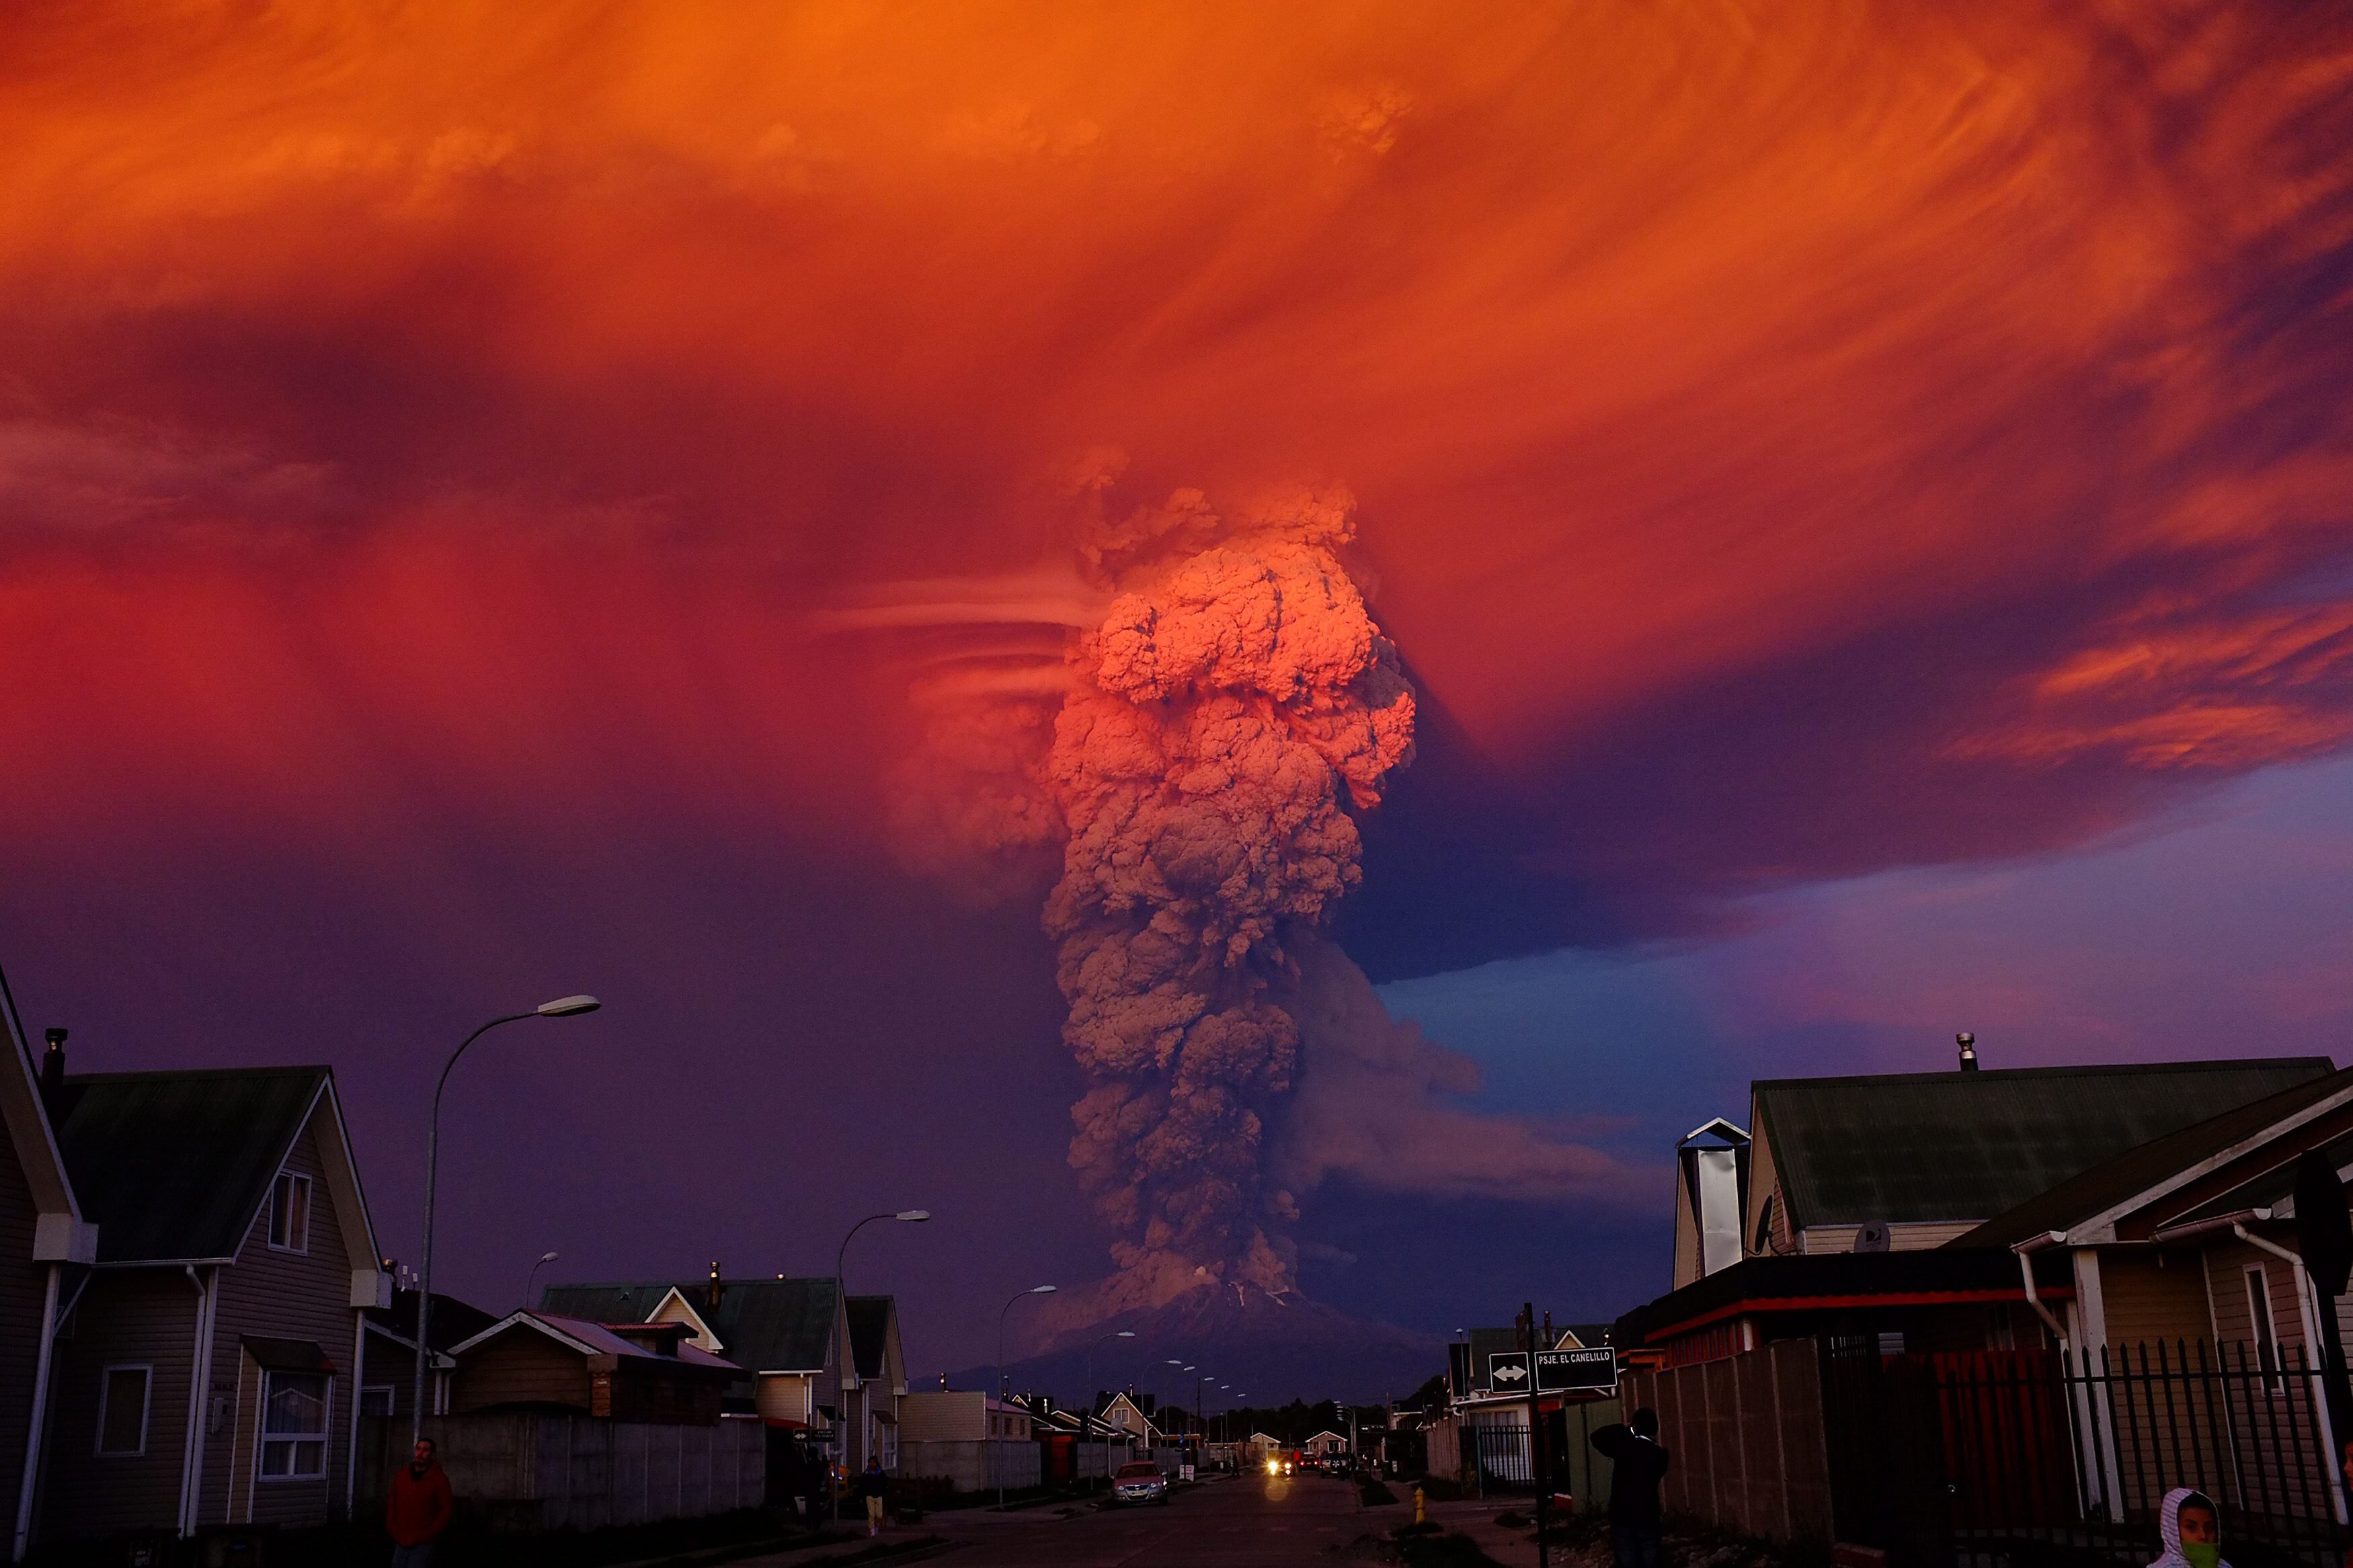 The Chilean Calbuco volcano seen from Puerto Montt, located 600 miles south of Santiago de Chile, Chile on April 22, 2015. The eruption caused a column of smoke over ten miles high. Authorities declared a red alert and ordered the evacuation of around 1500 residents in the area surrounding the volcano.